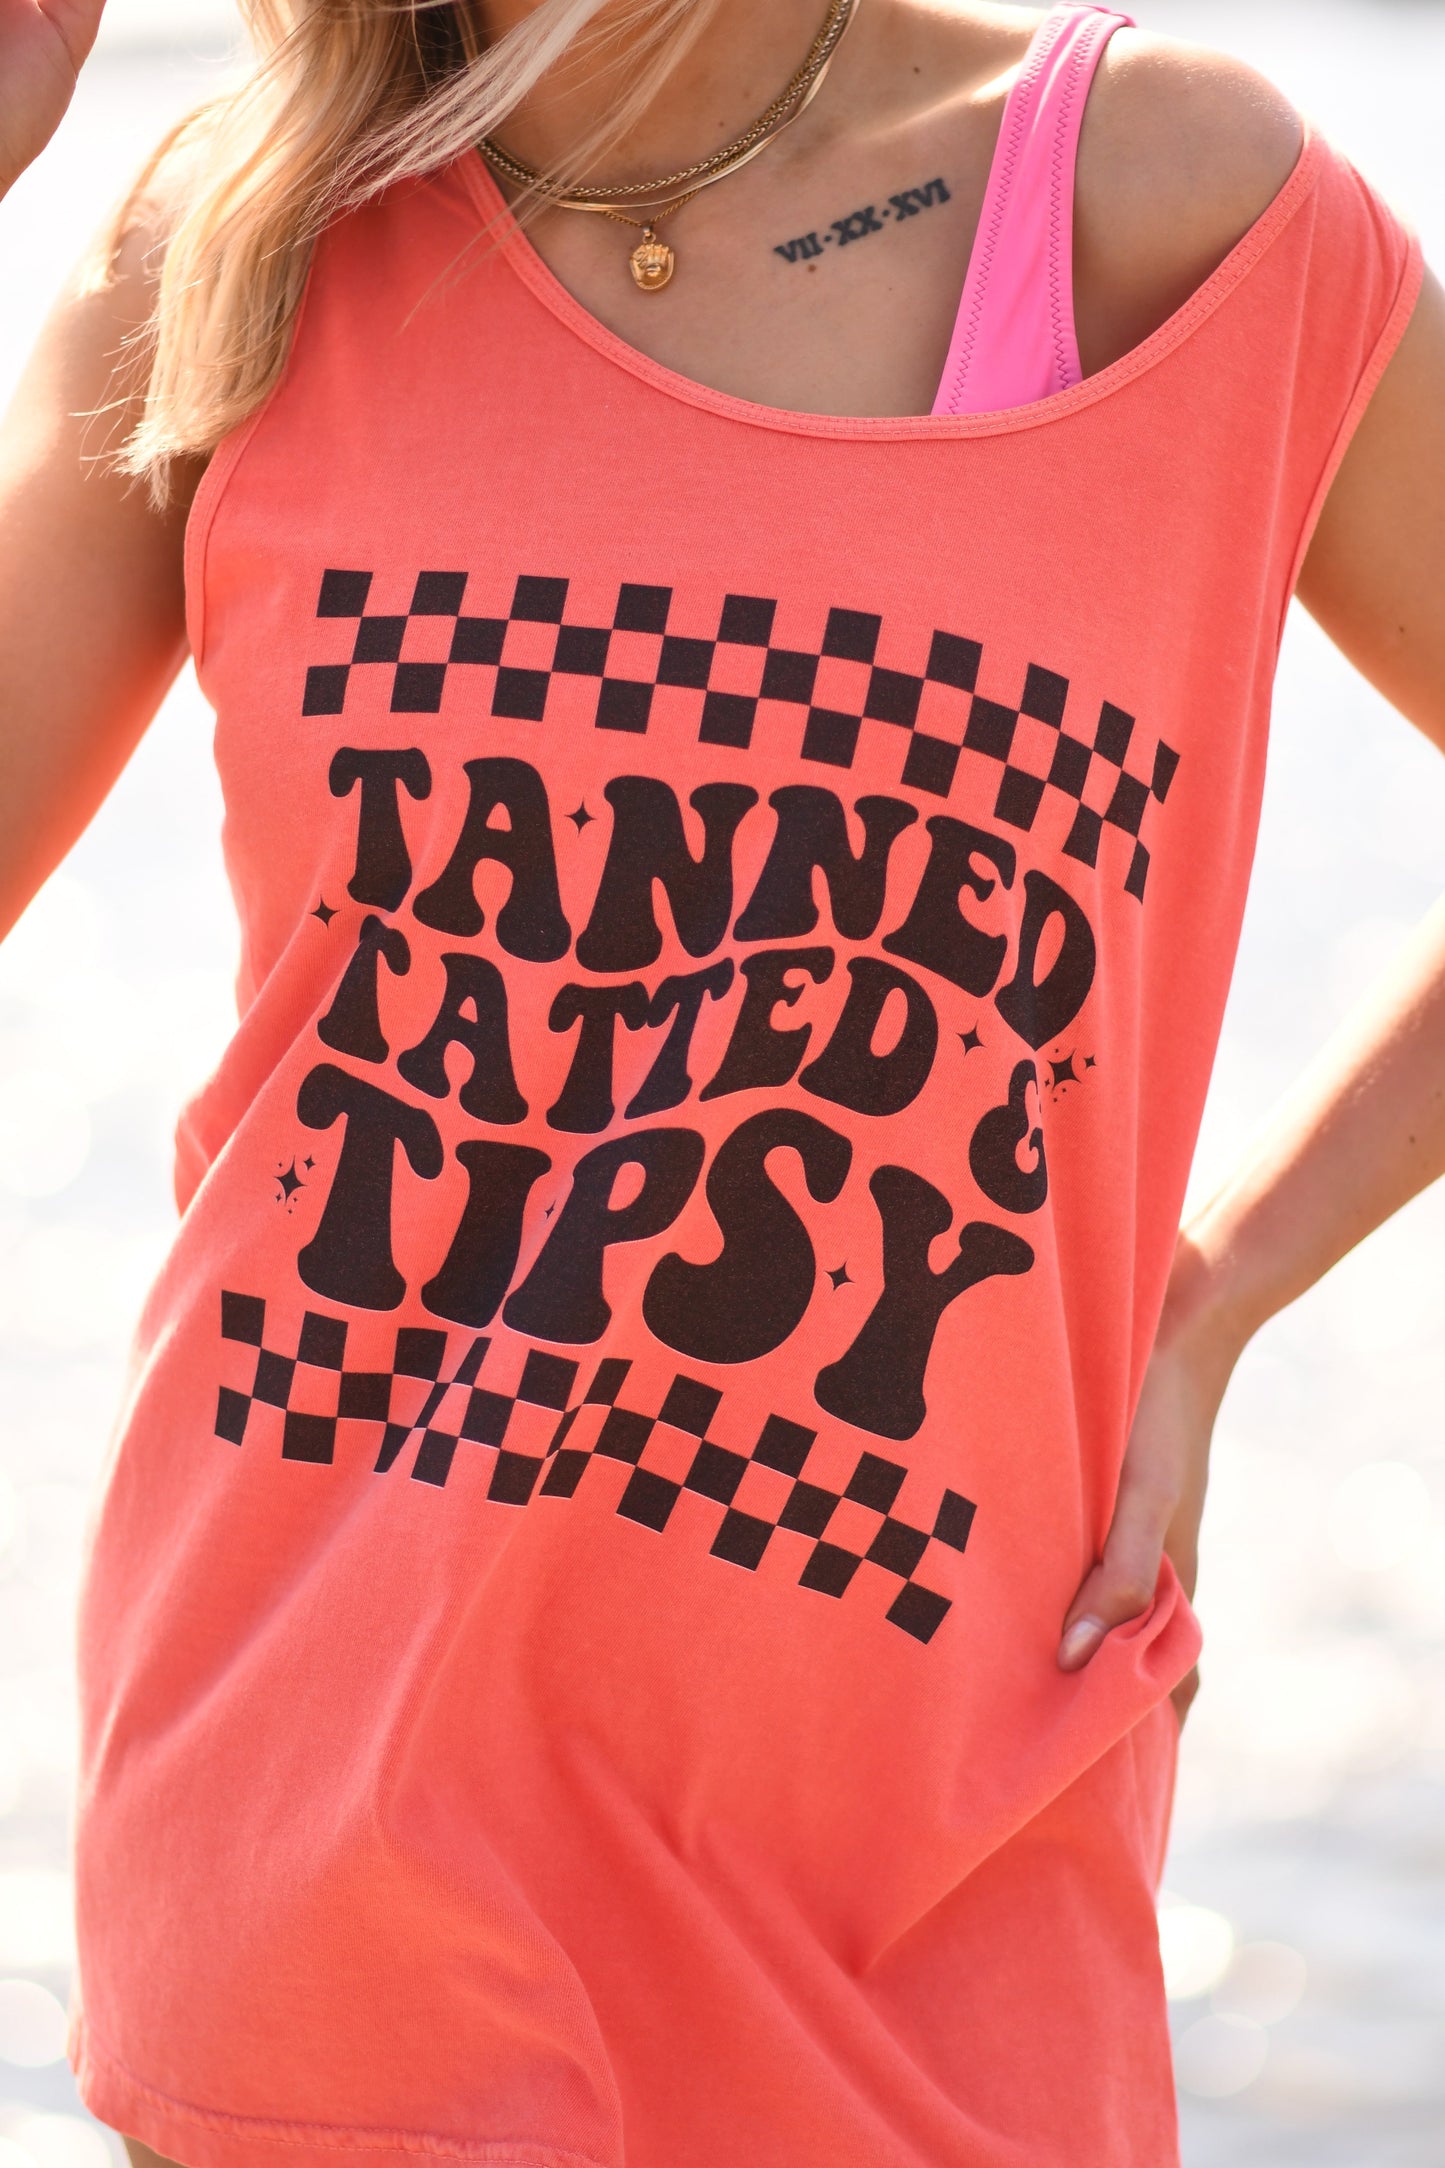 Tanned Tatted And Tipsy Tank/Tee